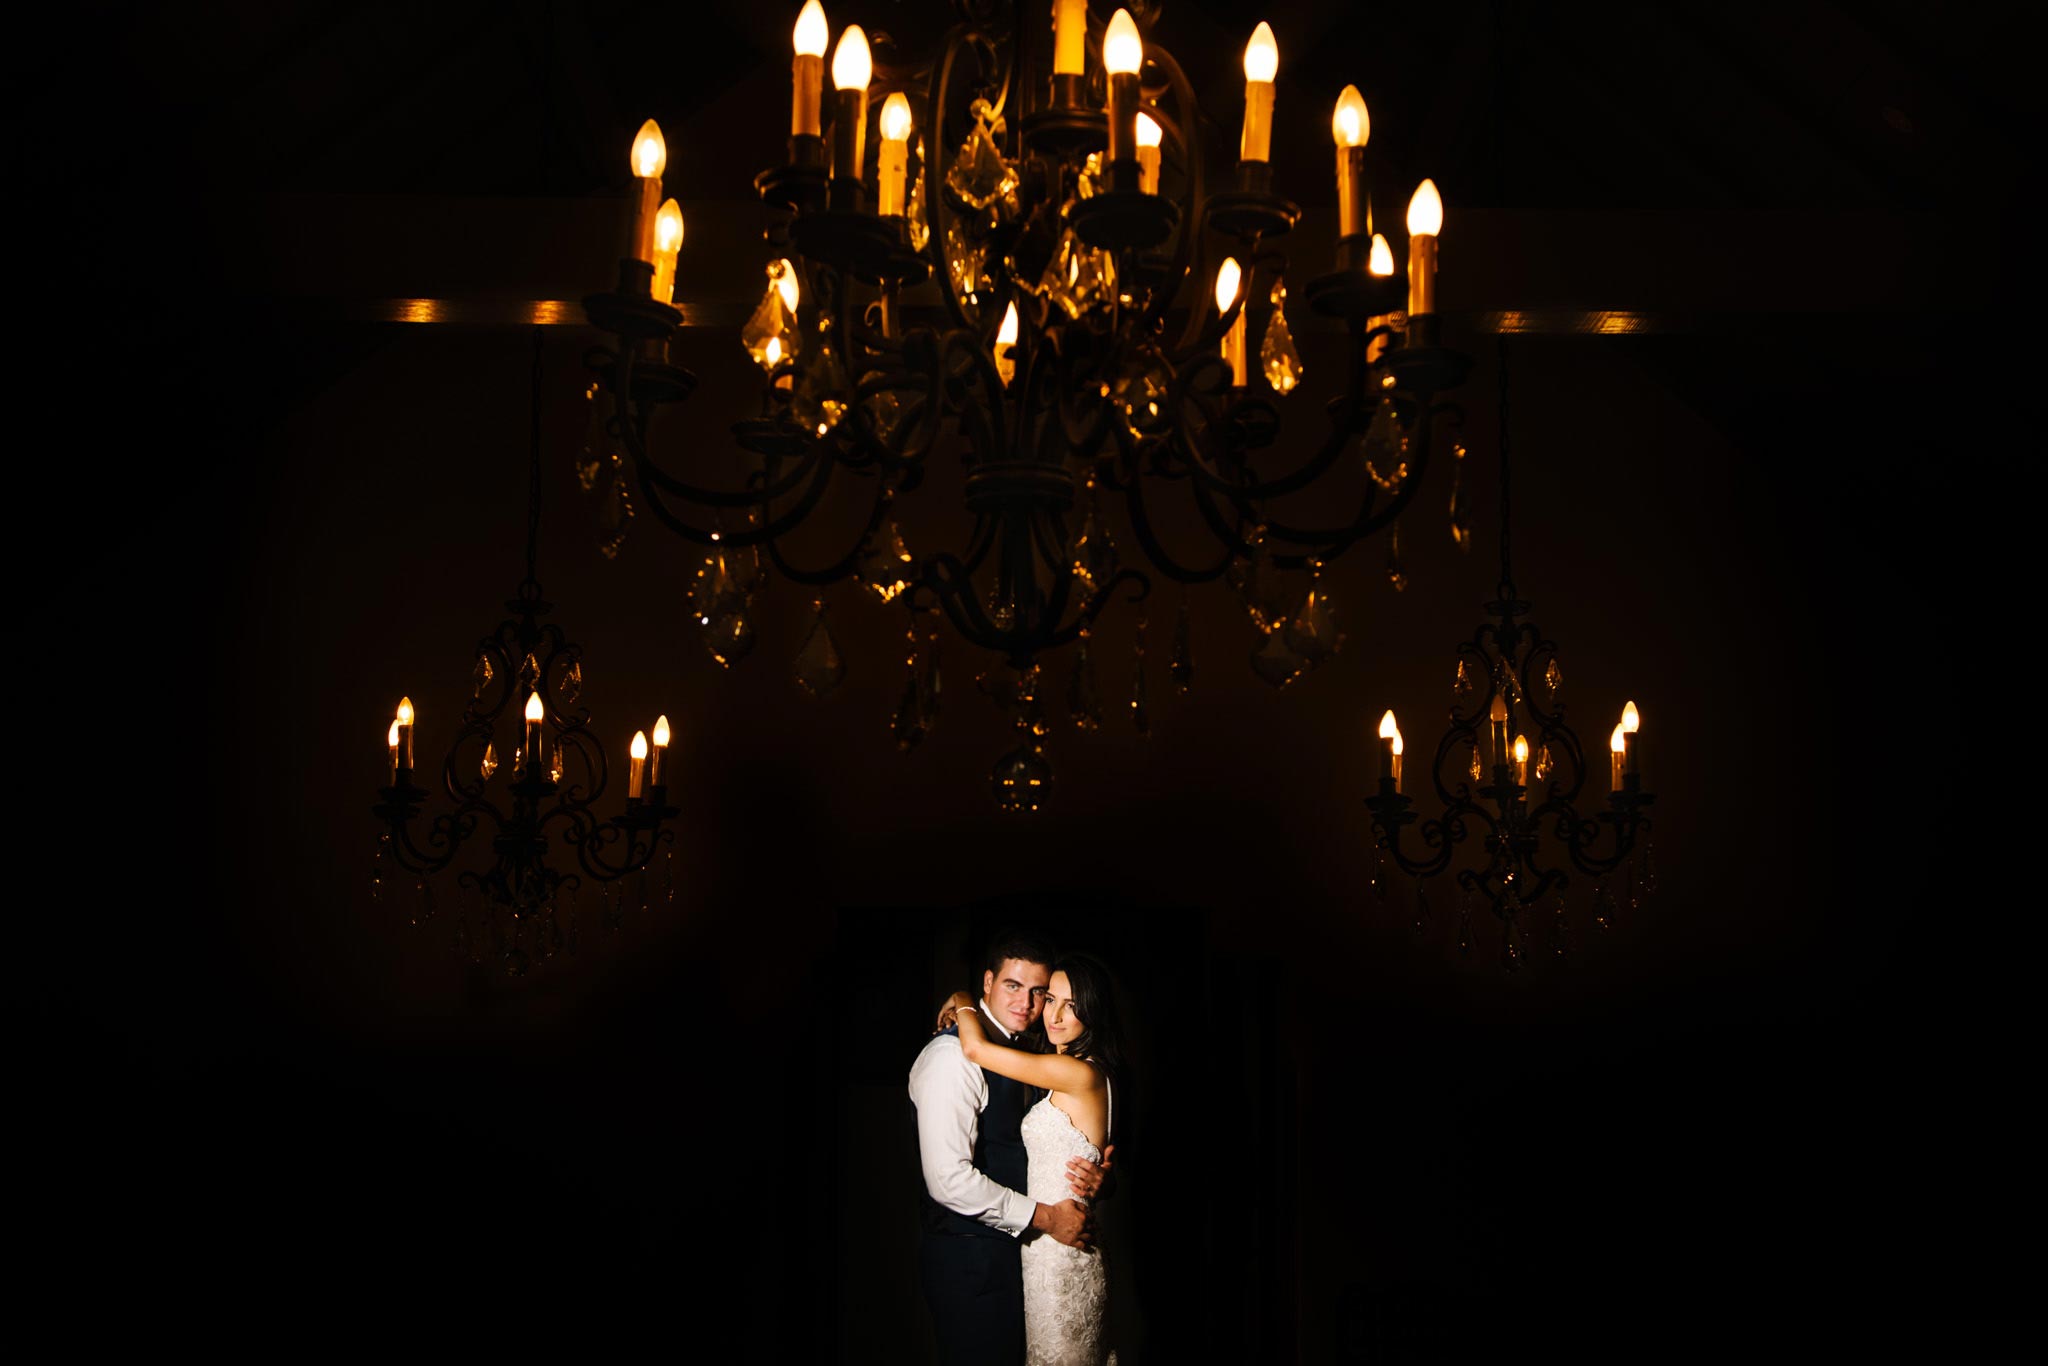 Bride and groom embrace under chandeliers at Manly Golf Club wedding reception